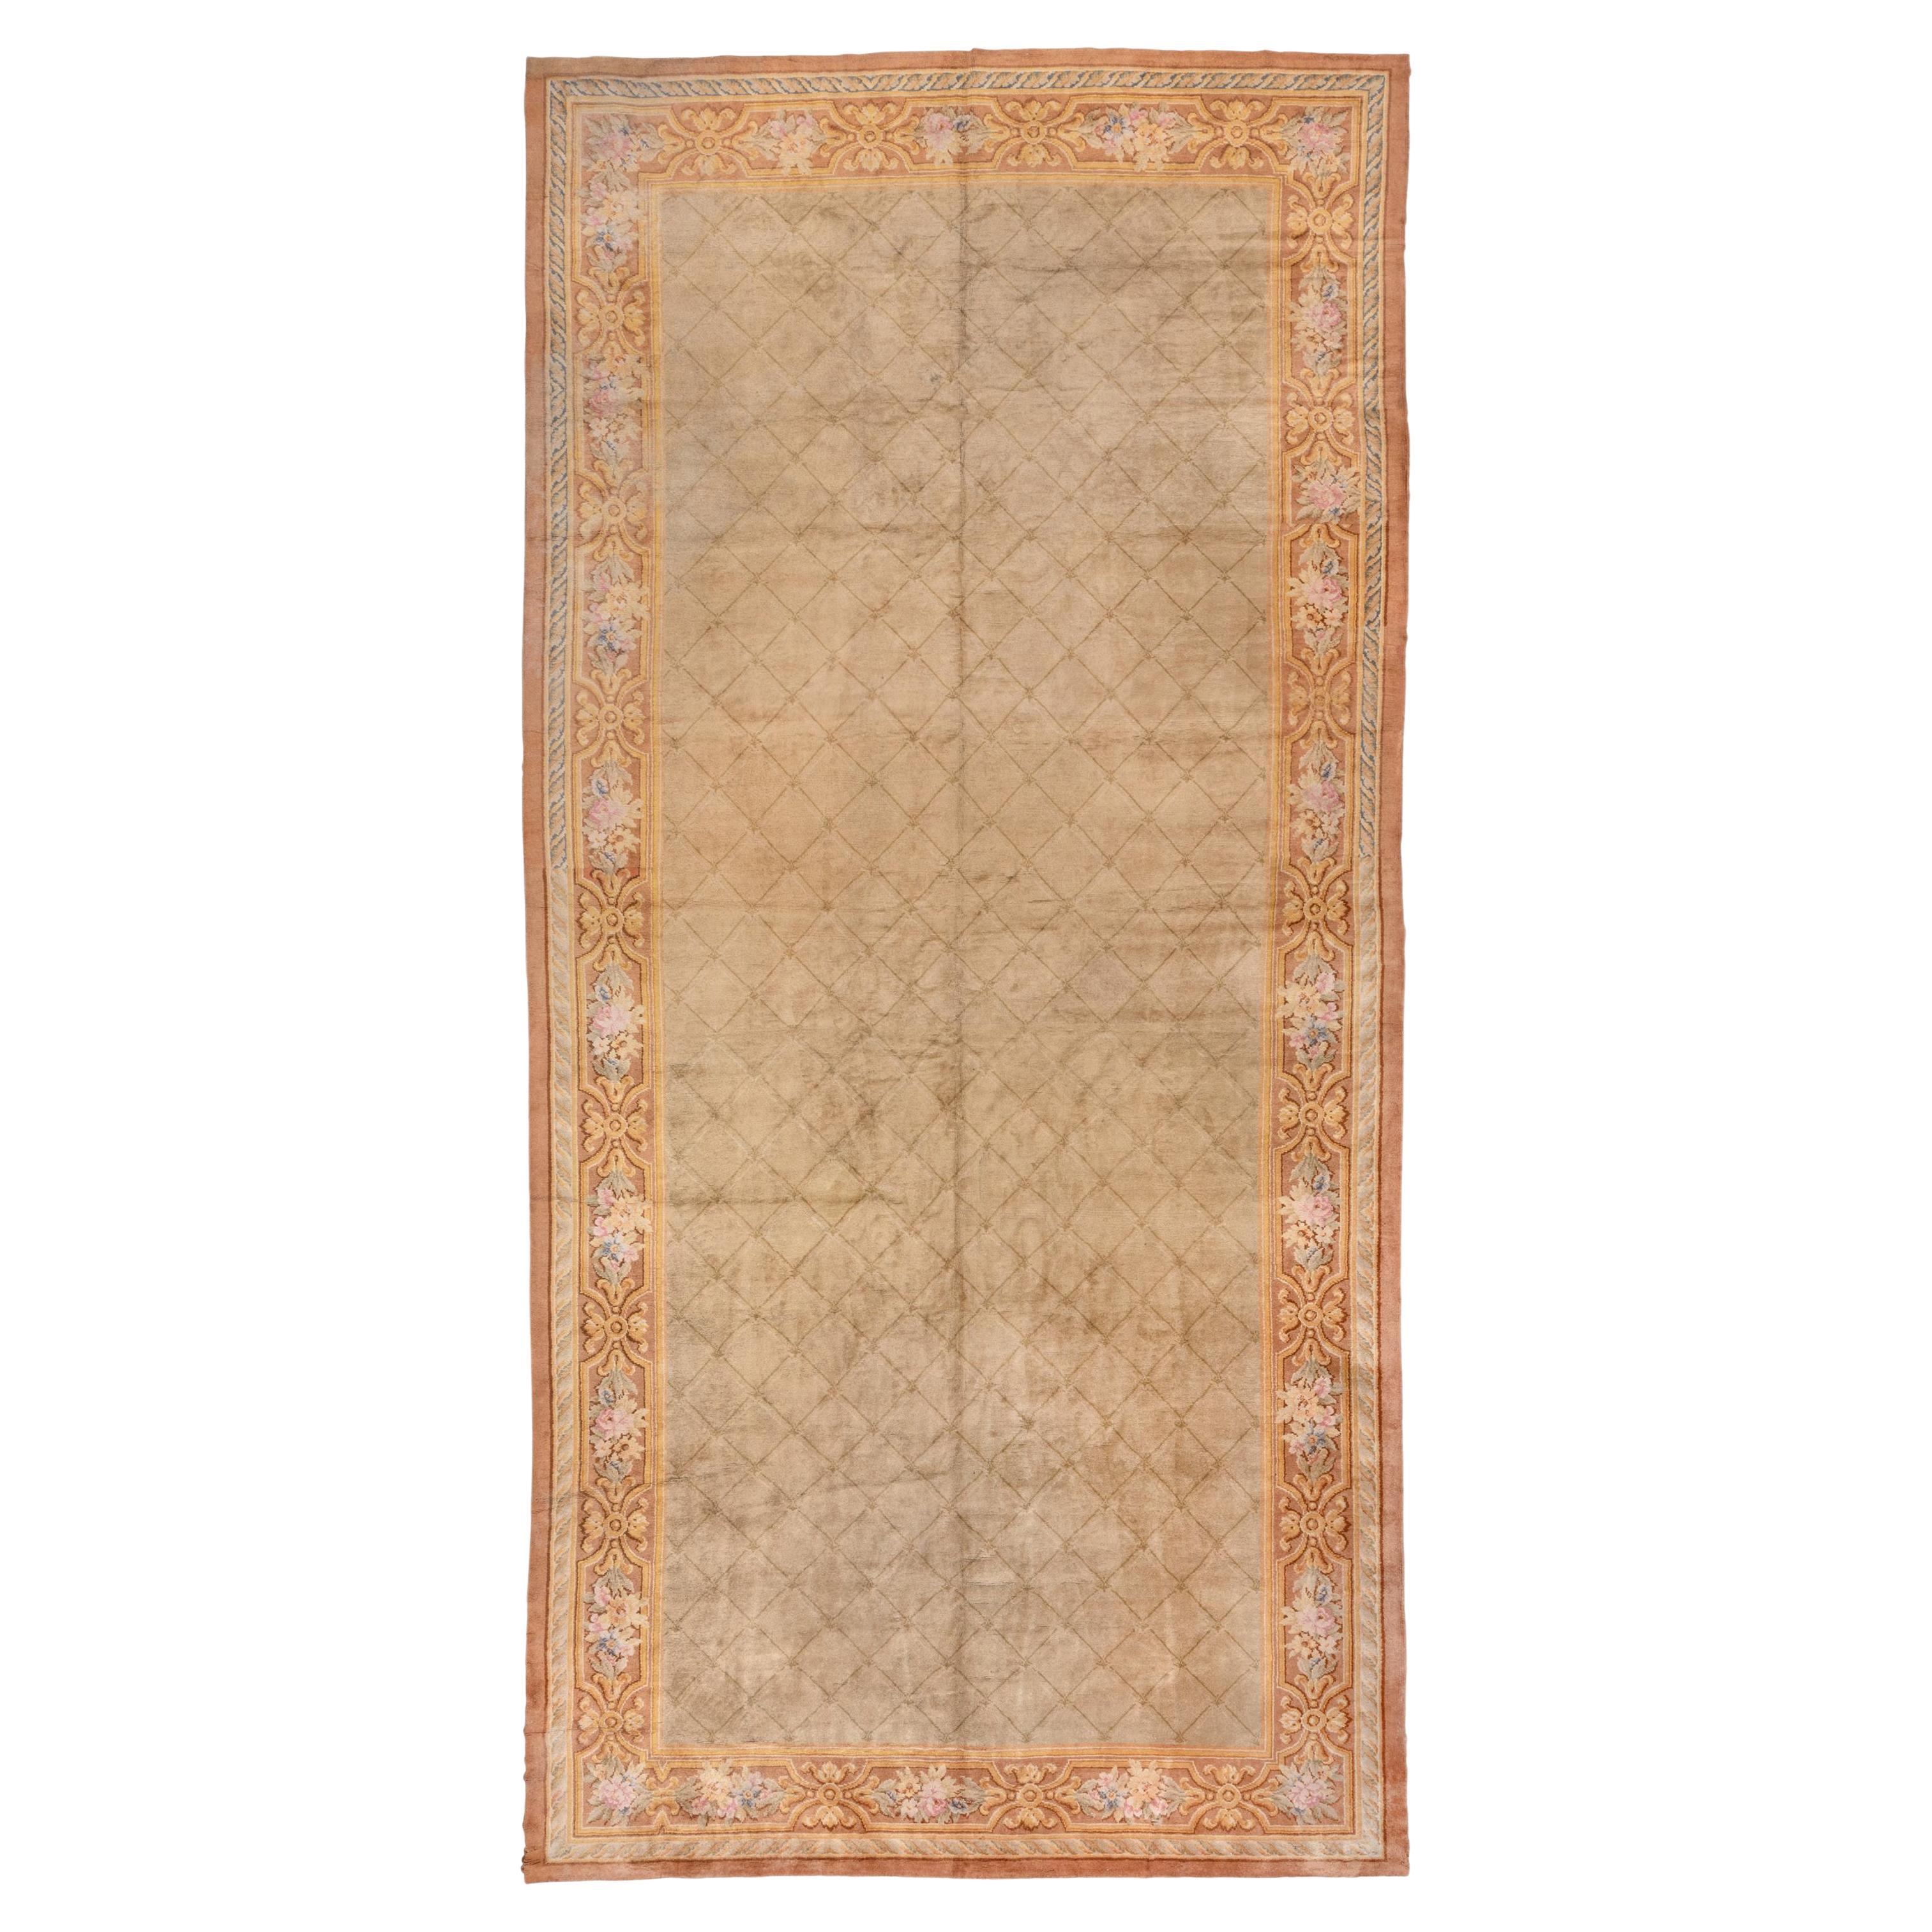 Antique English Axminister Art Deco Large Rug, circa 1900s For Sale